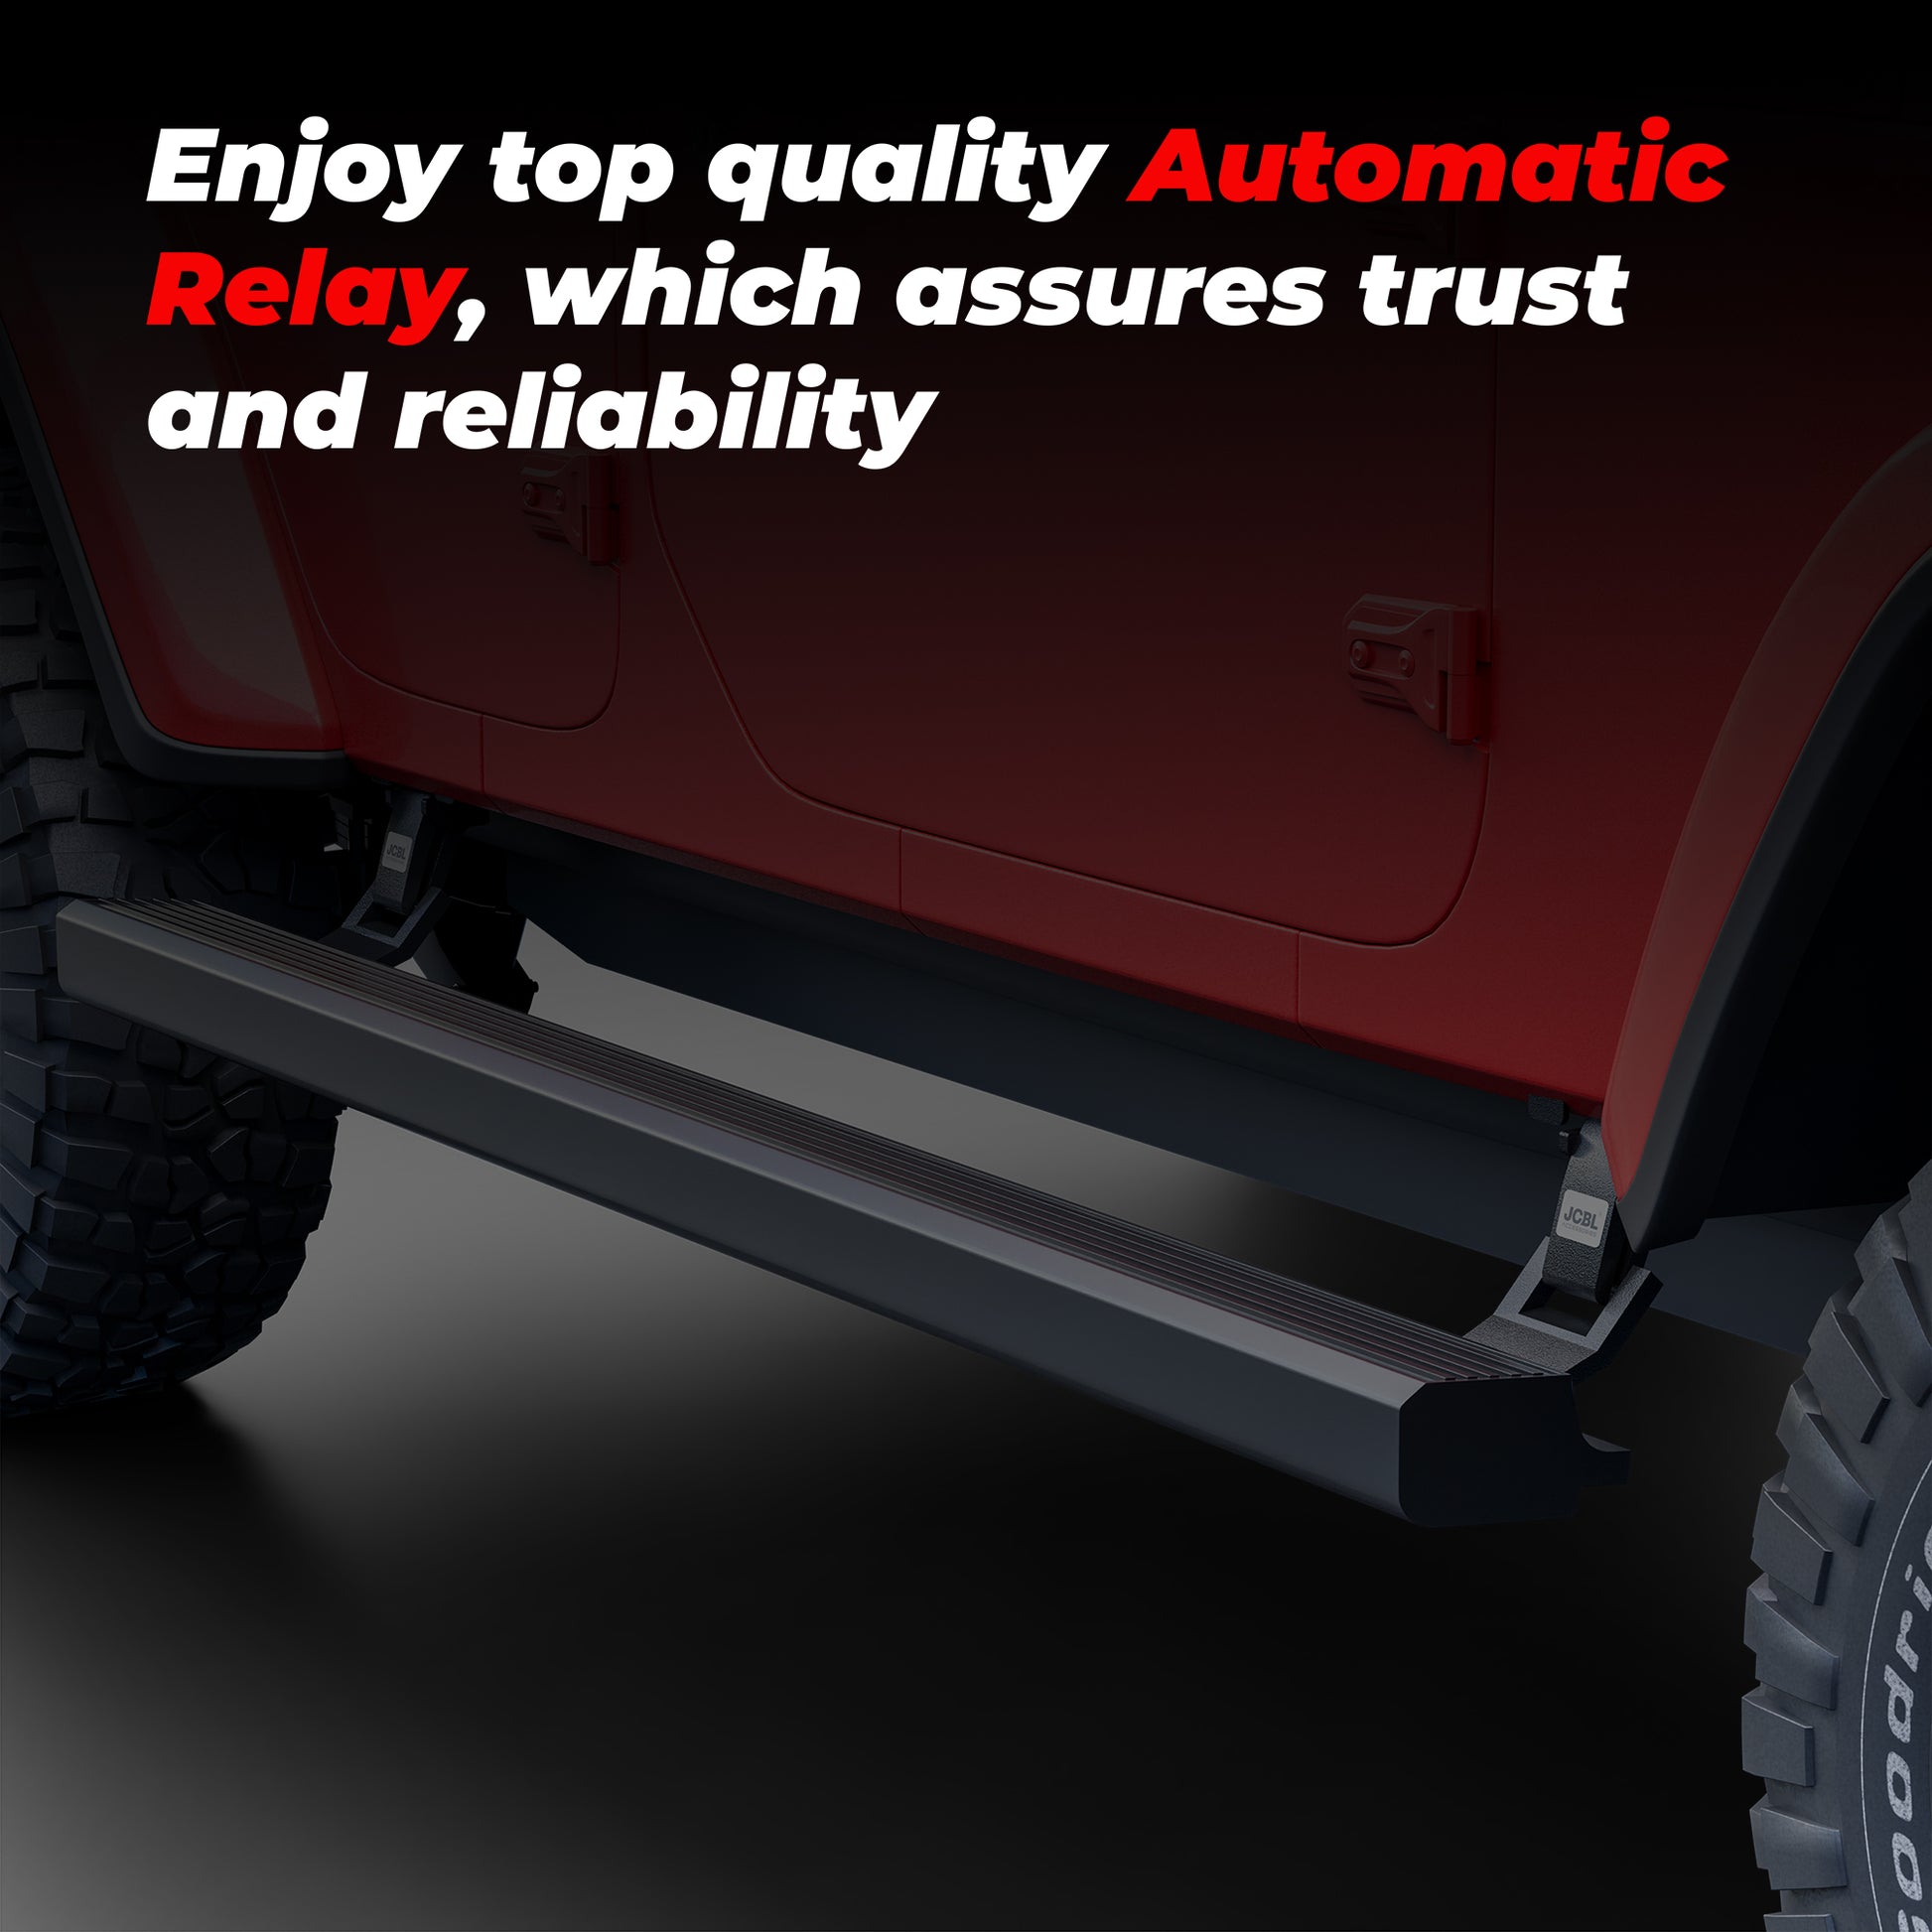 JCBL Accessories Automatic Door Side E-Step for SUVs (Jeep Wrangler 18+ E-Side Step) | Enjoy top quality Automatic Relay, which assures trust ‘and reliability 